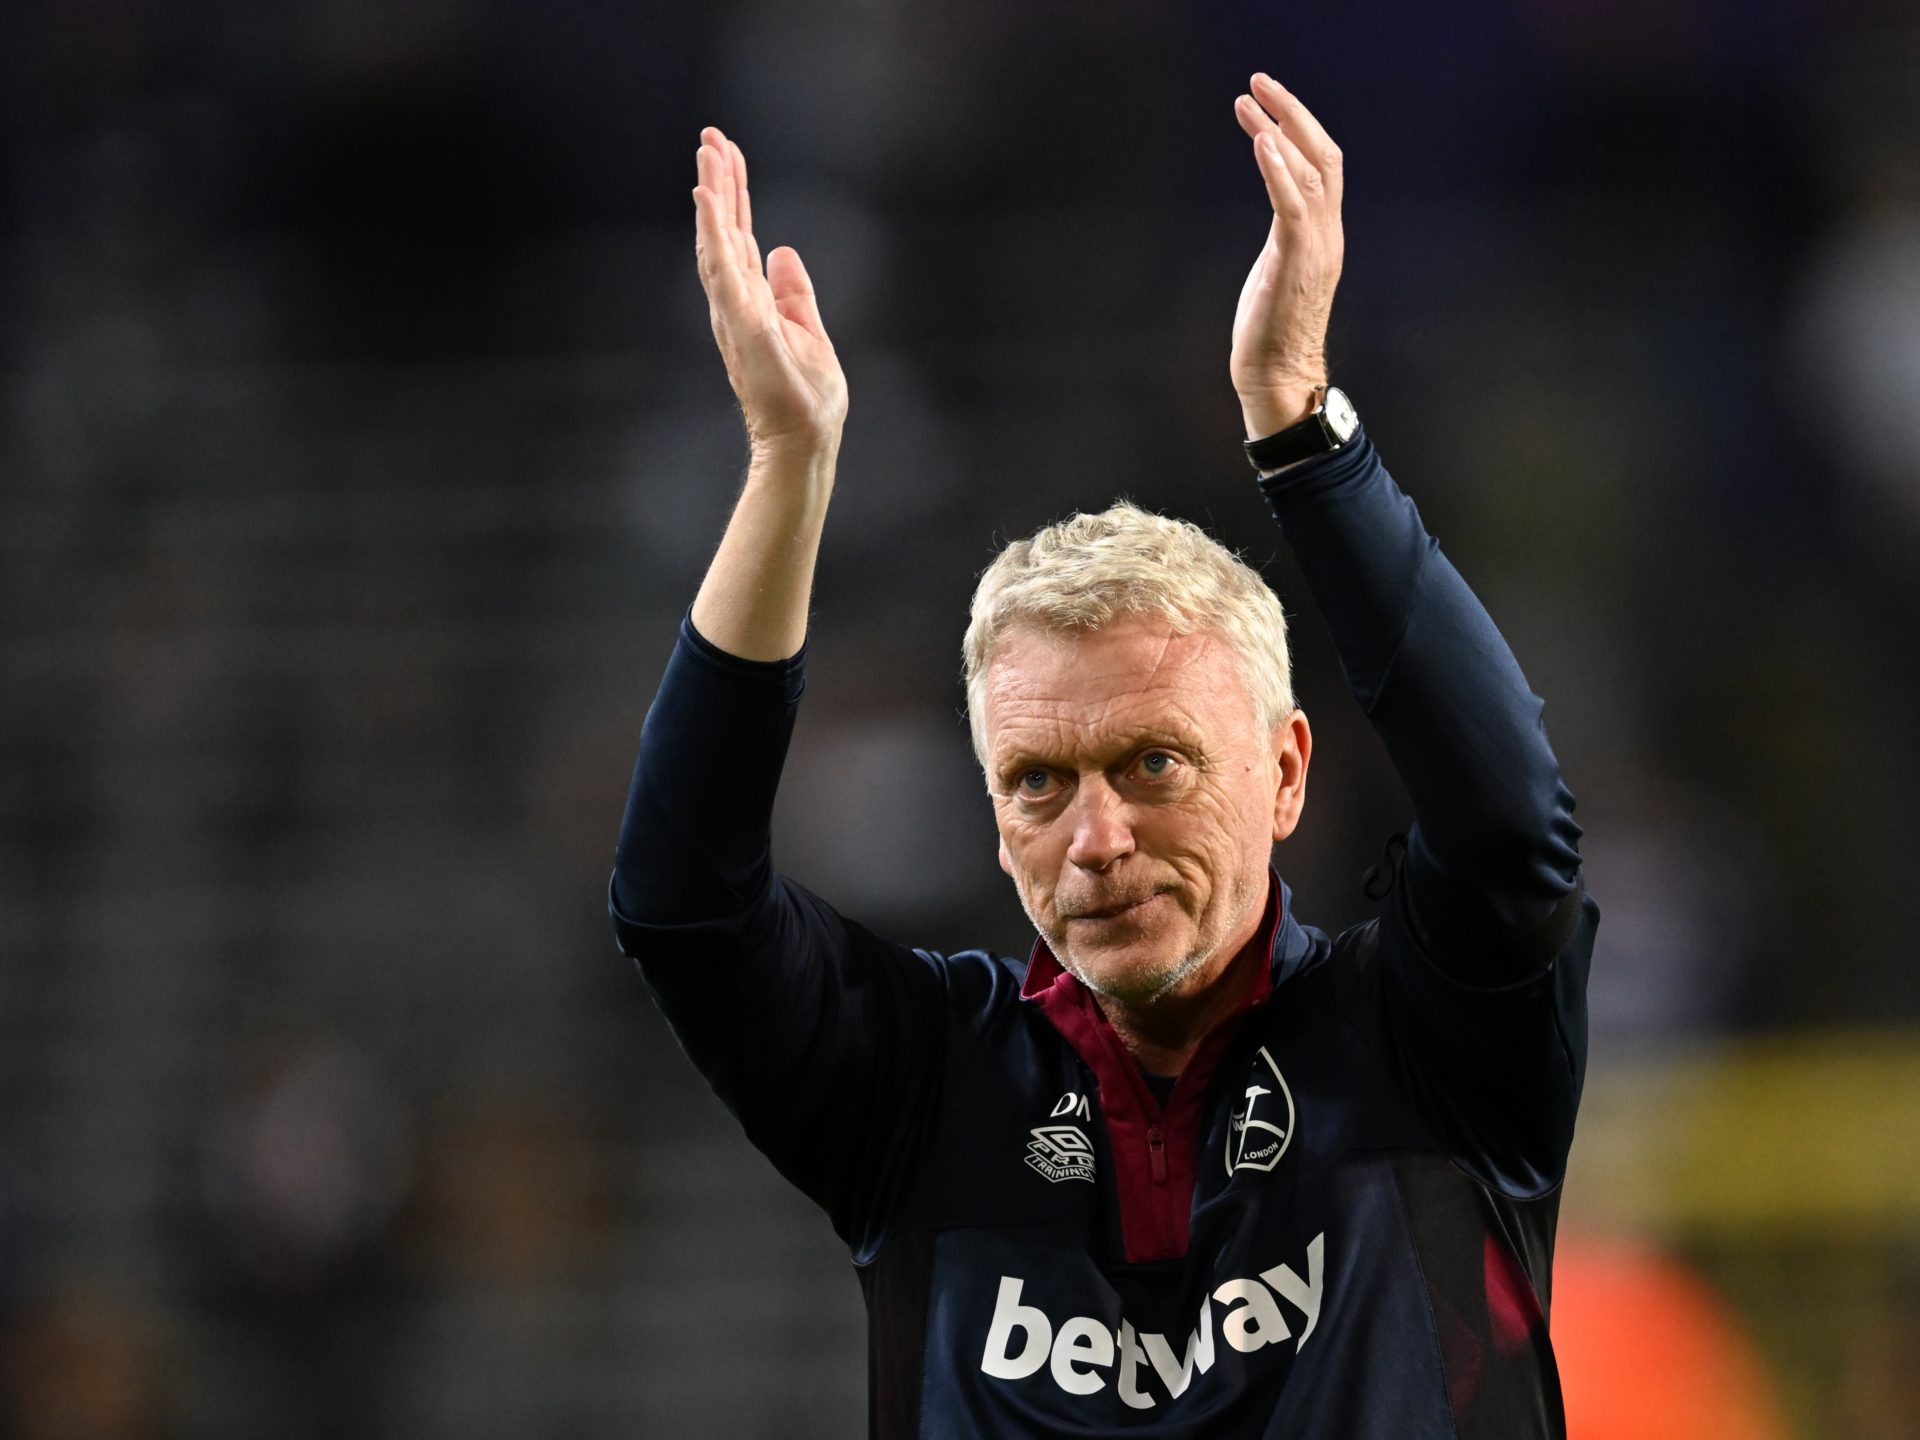 ‘Really good’: Moyes starstruck by West Ham players Bowen and Downes vs Anderlecht